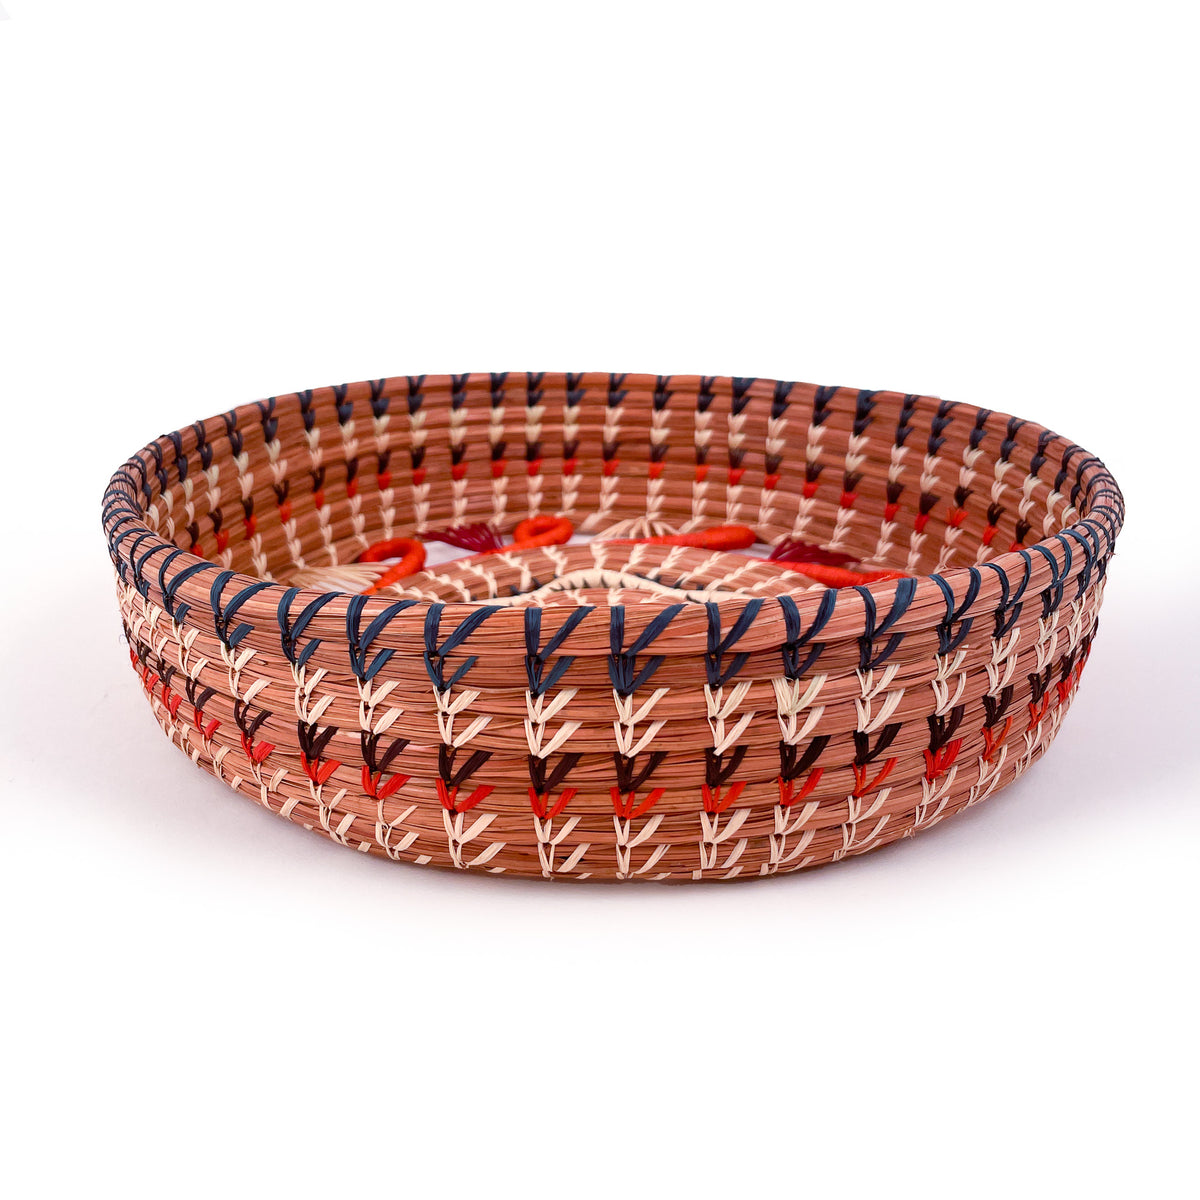 Side view of Cristina basket, showing raffia stitching in blue, natural, brown, and orange on natural pine needles